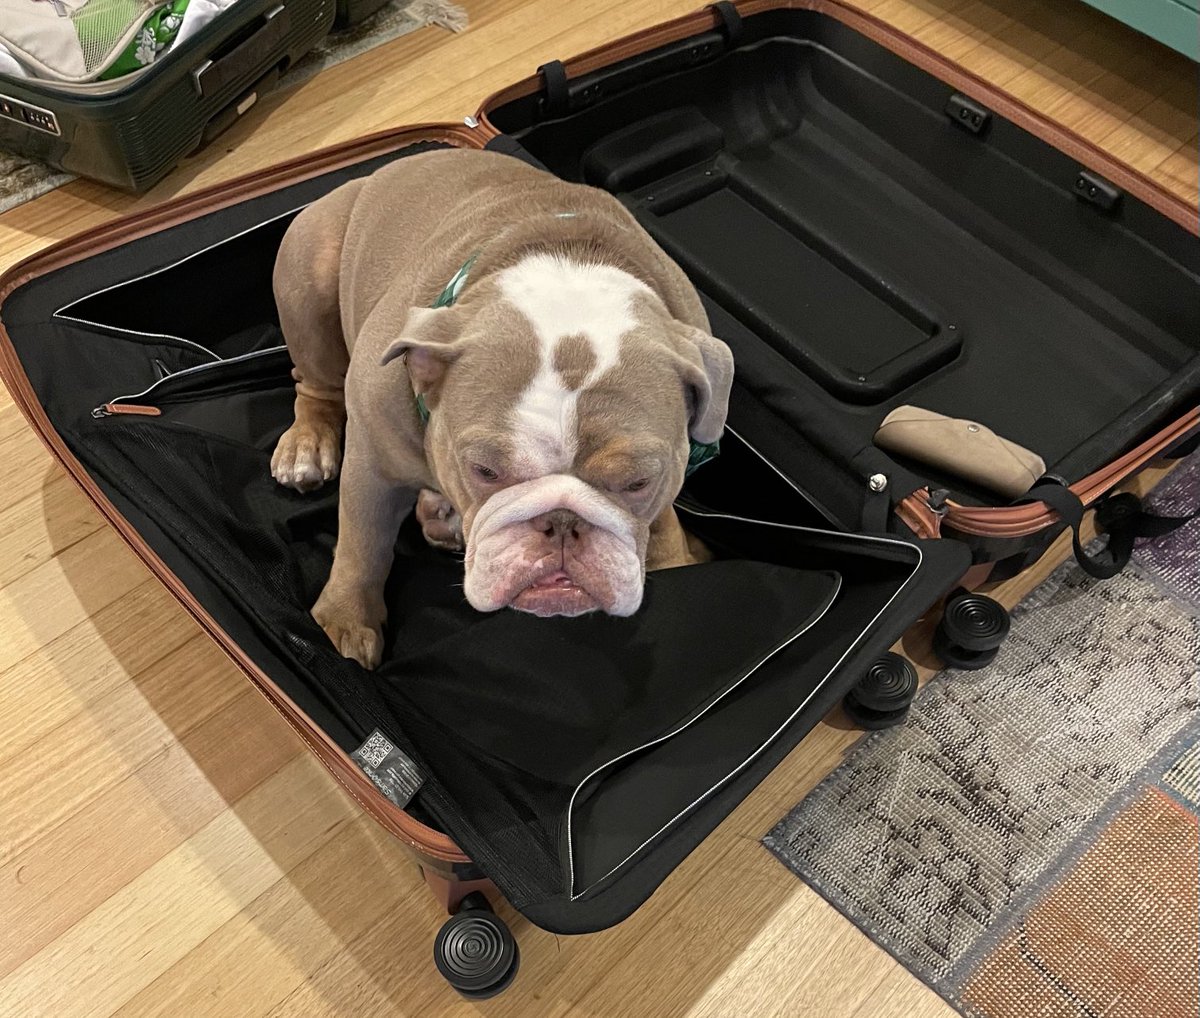 Please don’t go on holidays without me 
#bulldog #dogholidays